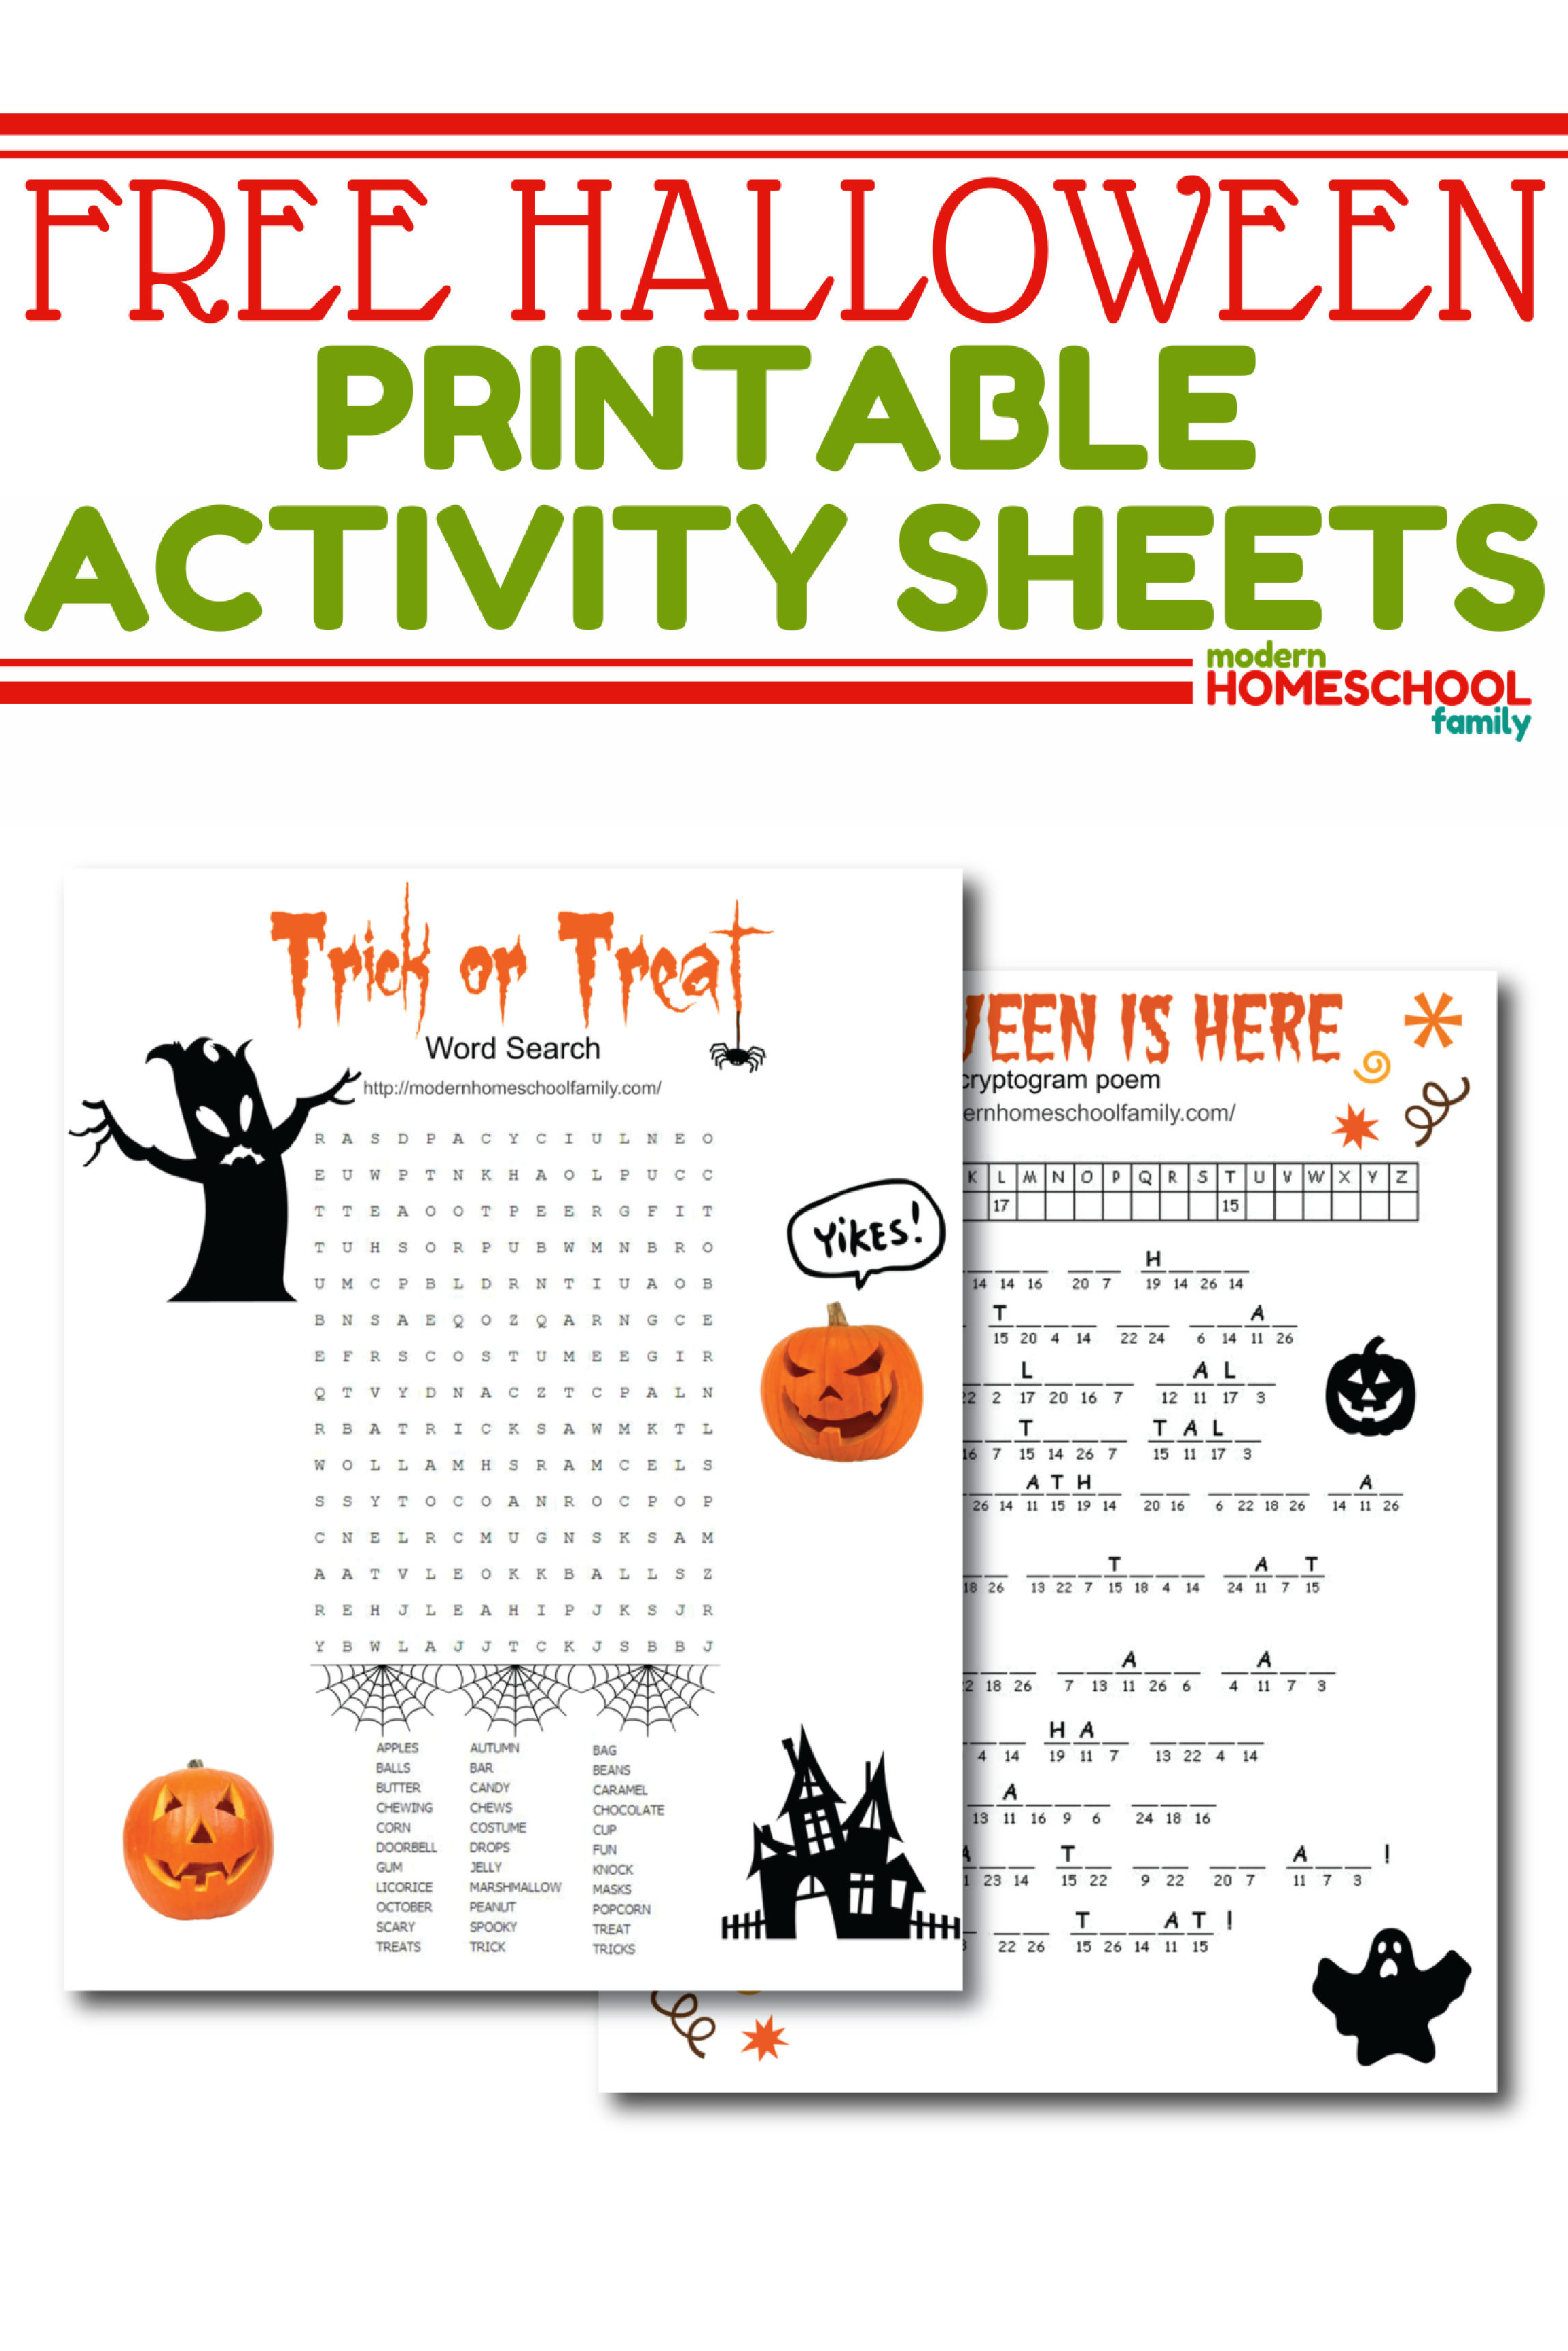 Free Halloween Printable Activity Sheets By Modern Homeschool Family